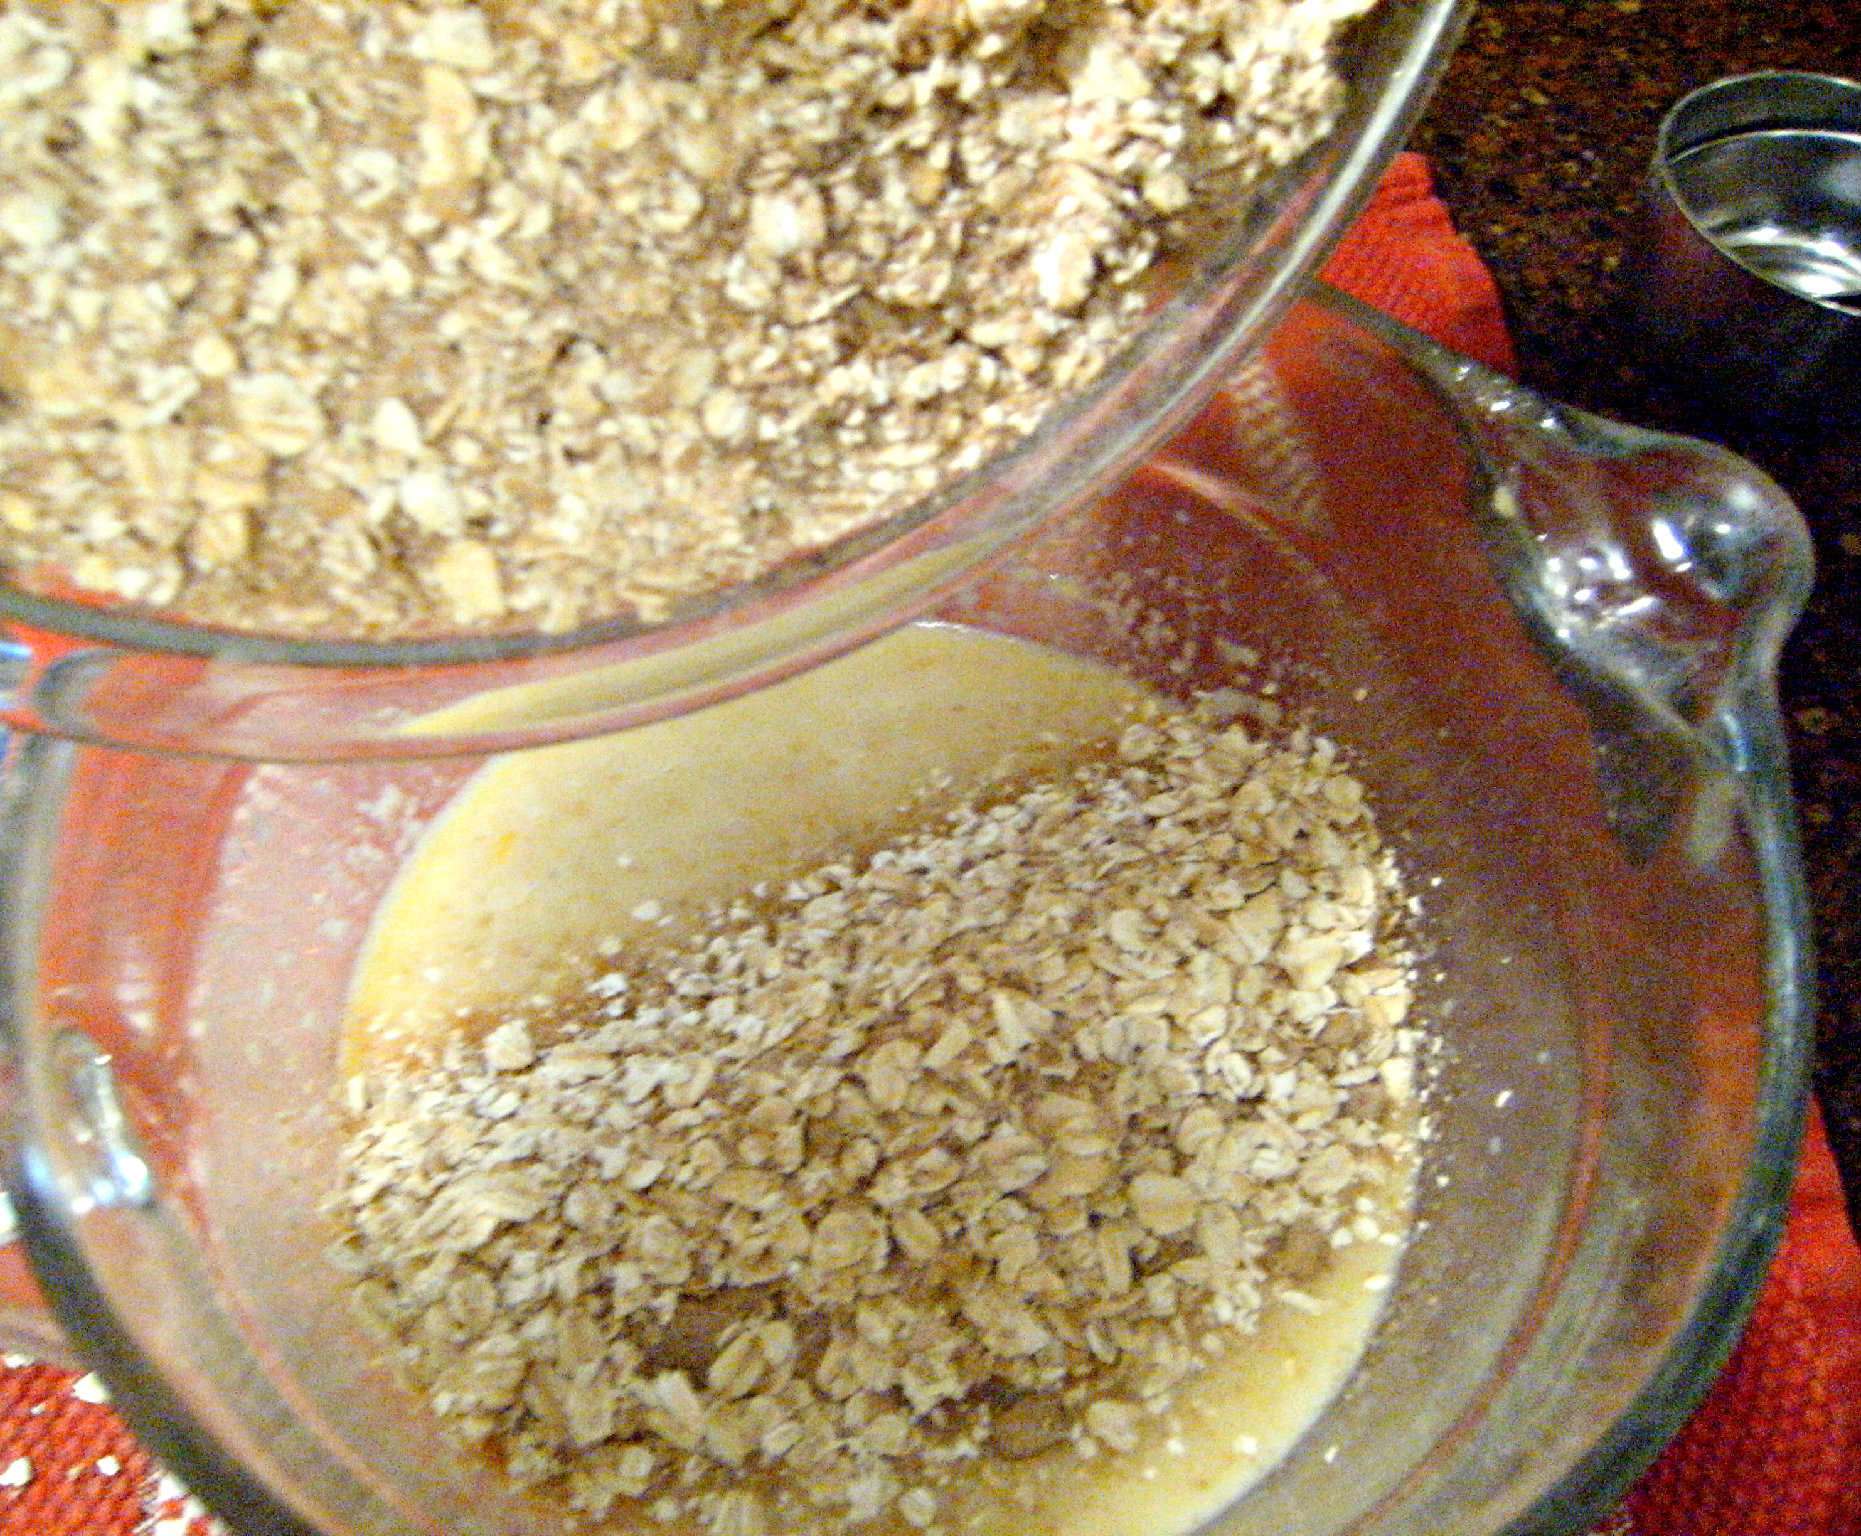 baked oatmeal recipe - combine wet ingredients and dry ingredients